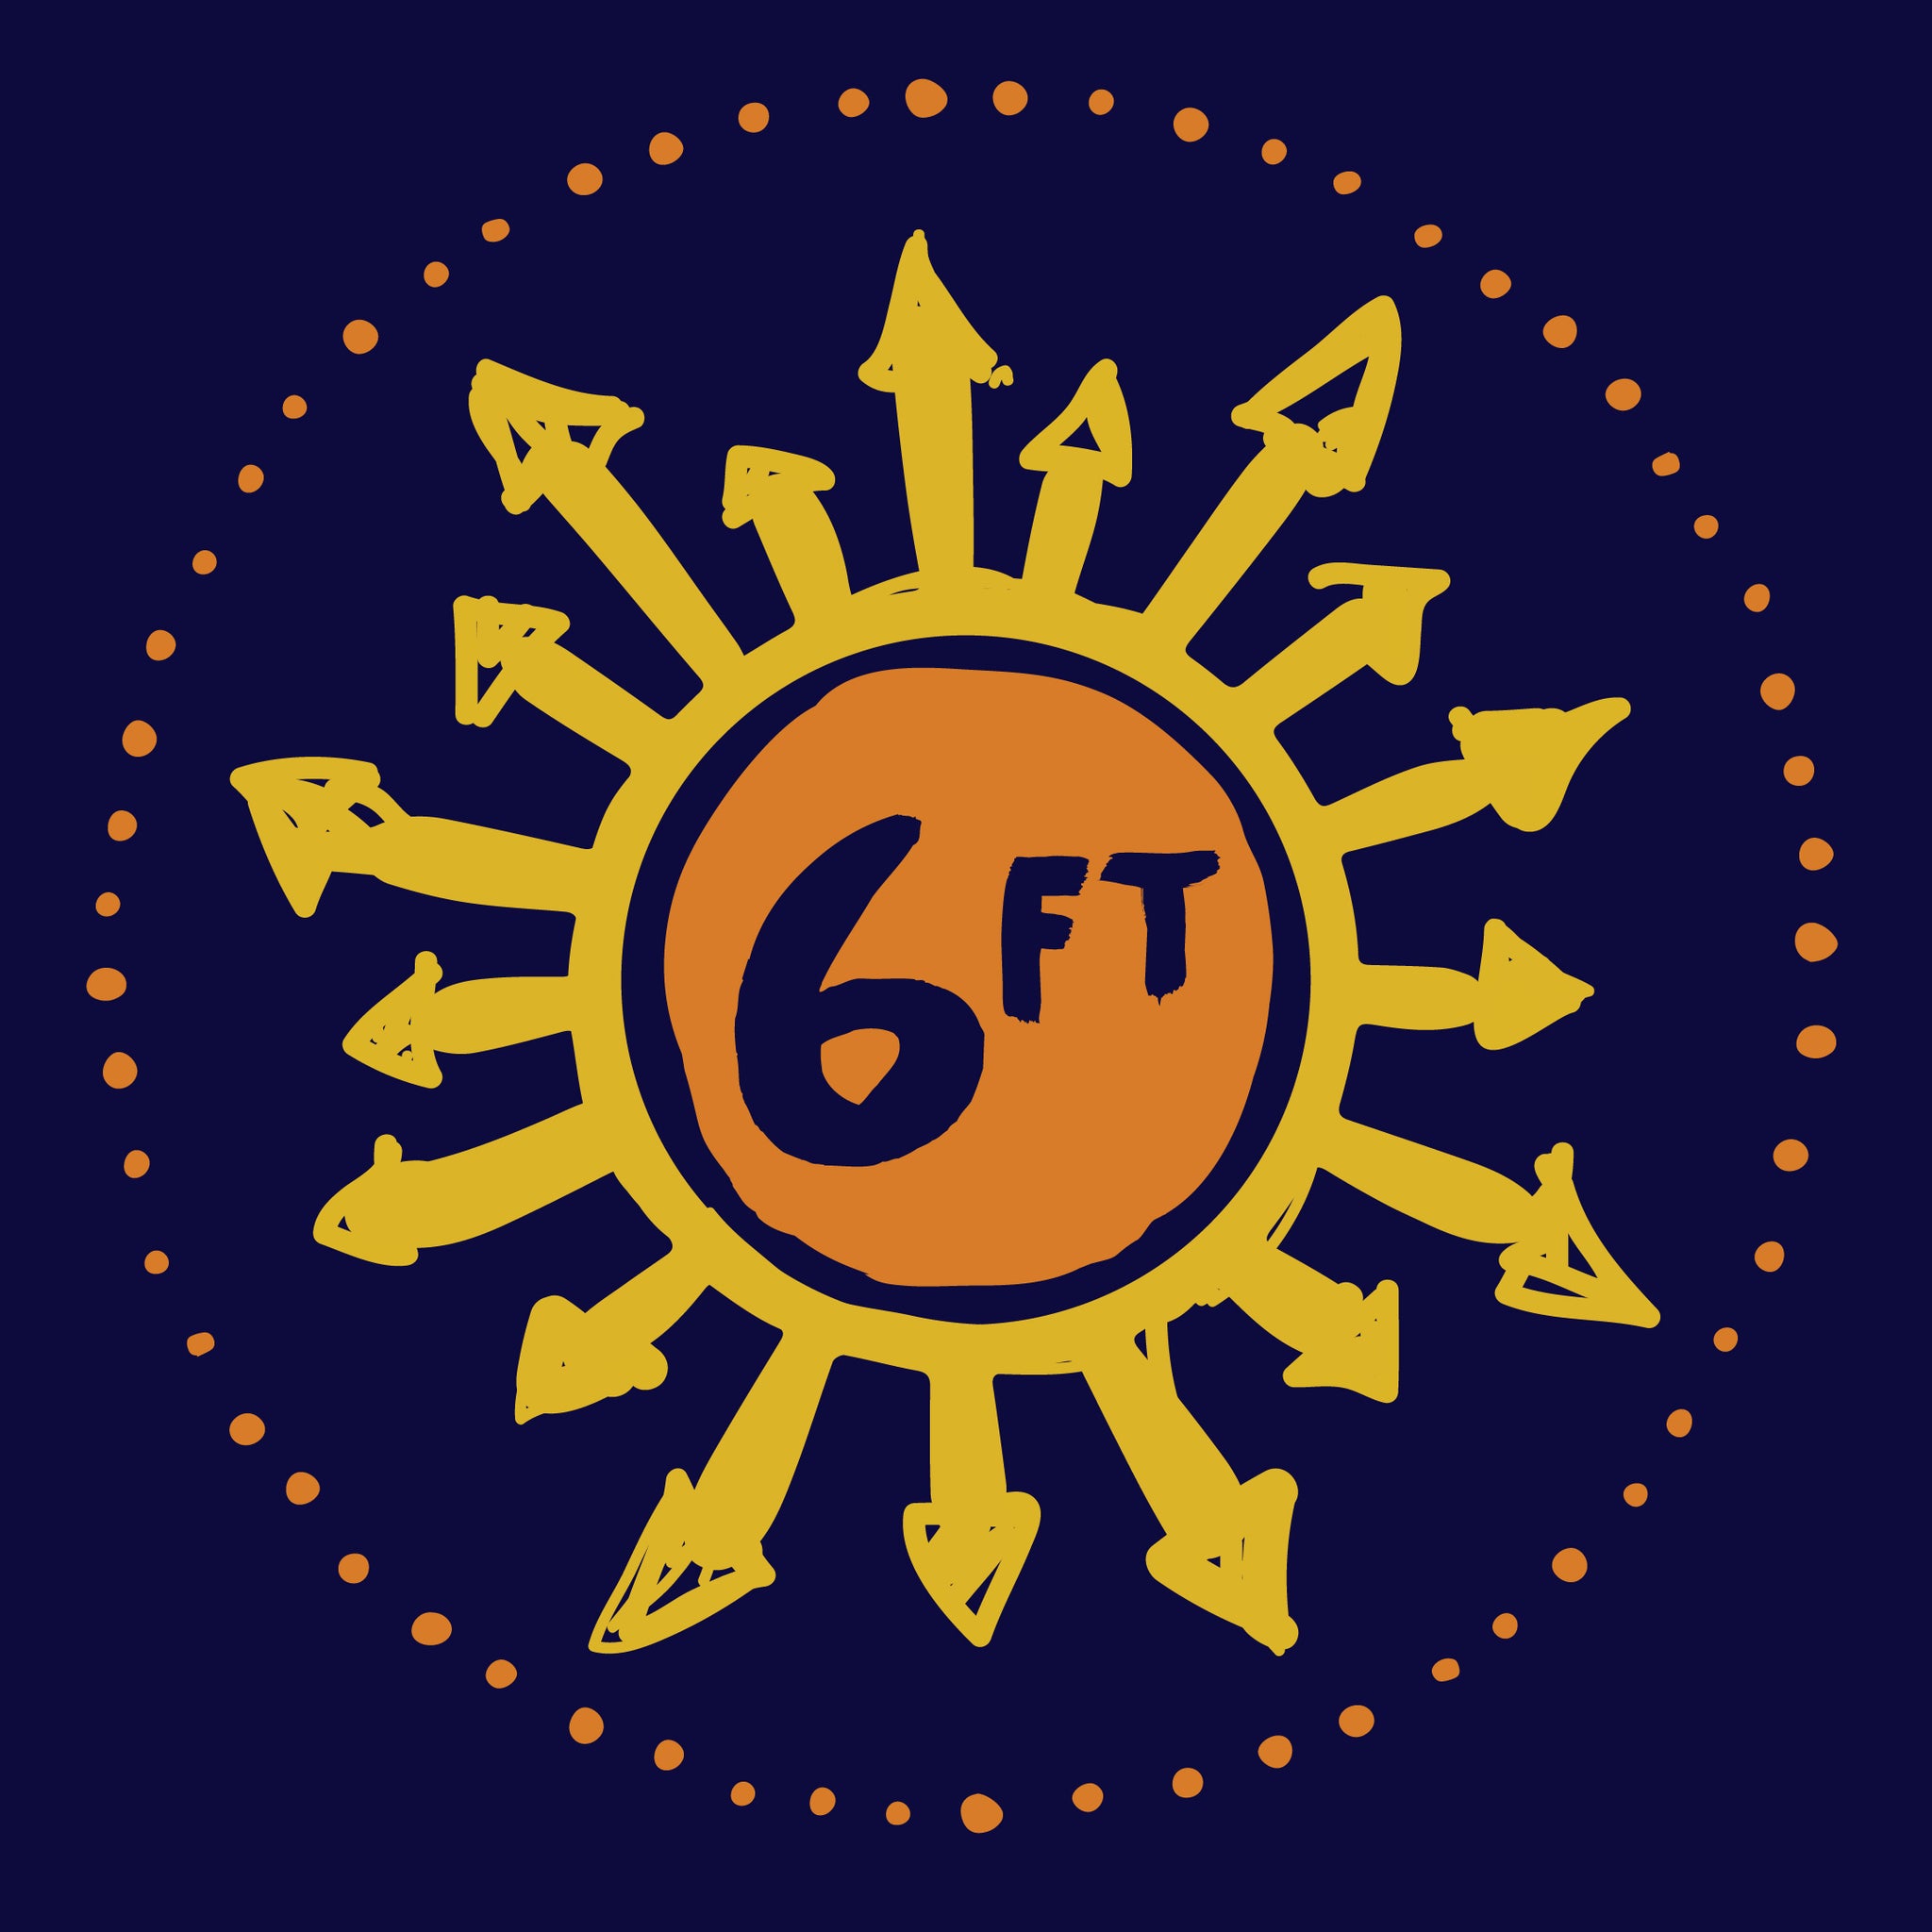 design with a sun made up of 6ft in the center and arrows going out in yellow and orange on navy background